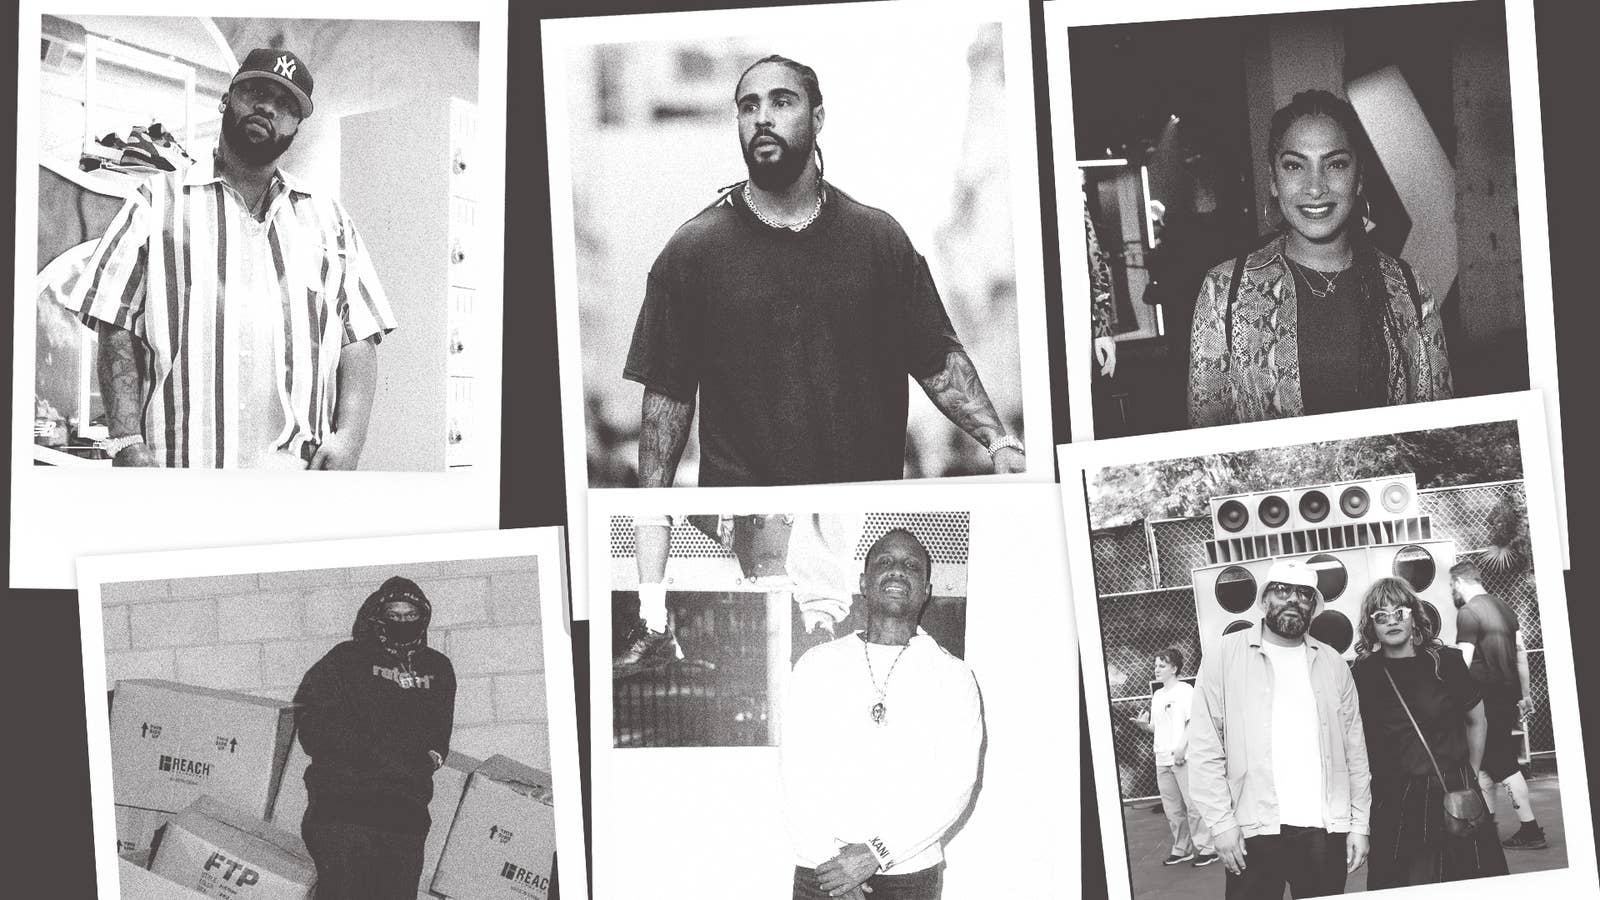 Supreme: How an Upstart NYC Skate Shop Changed Fashion Forever